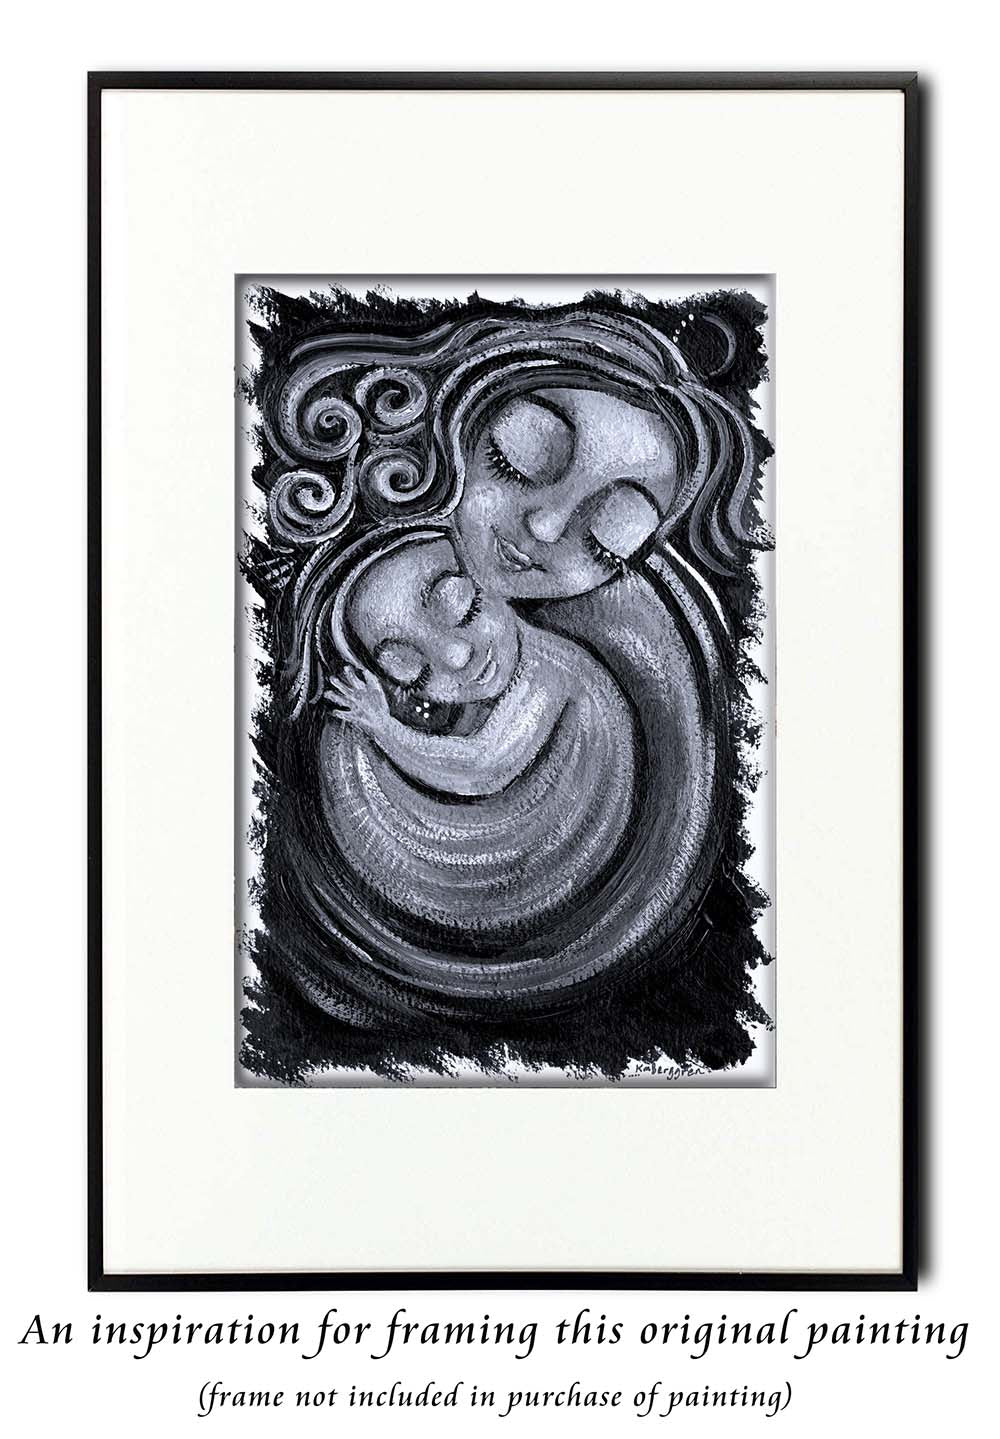 black and white Original 8x12 inch painting on heavy paper www.KmBerggren.com, black and white painting of mother and child, mom and baby art print, mother daughter original painting